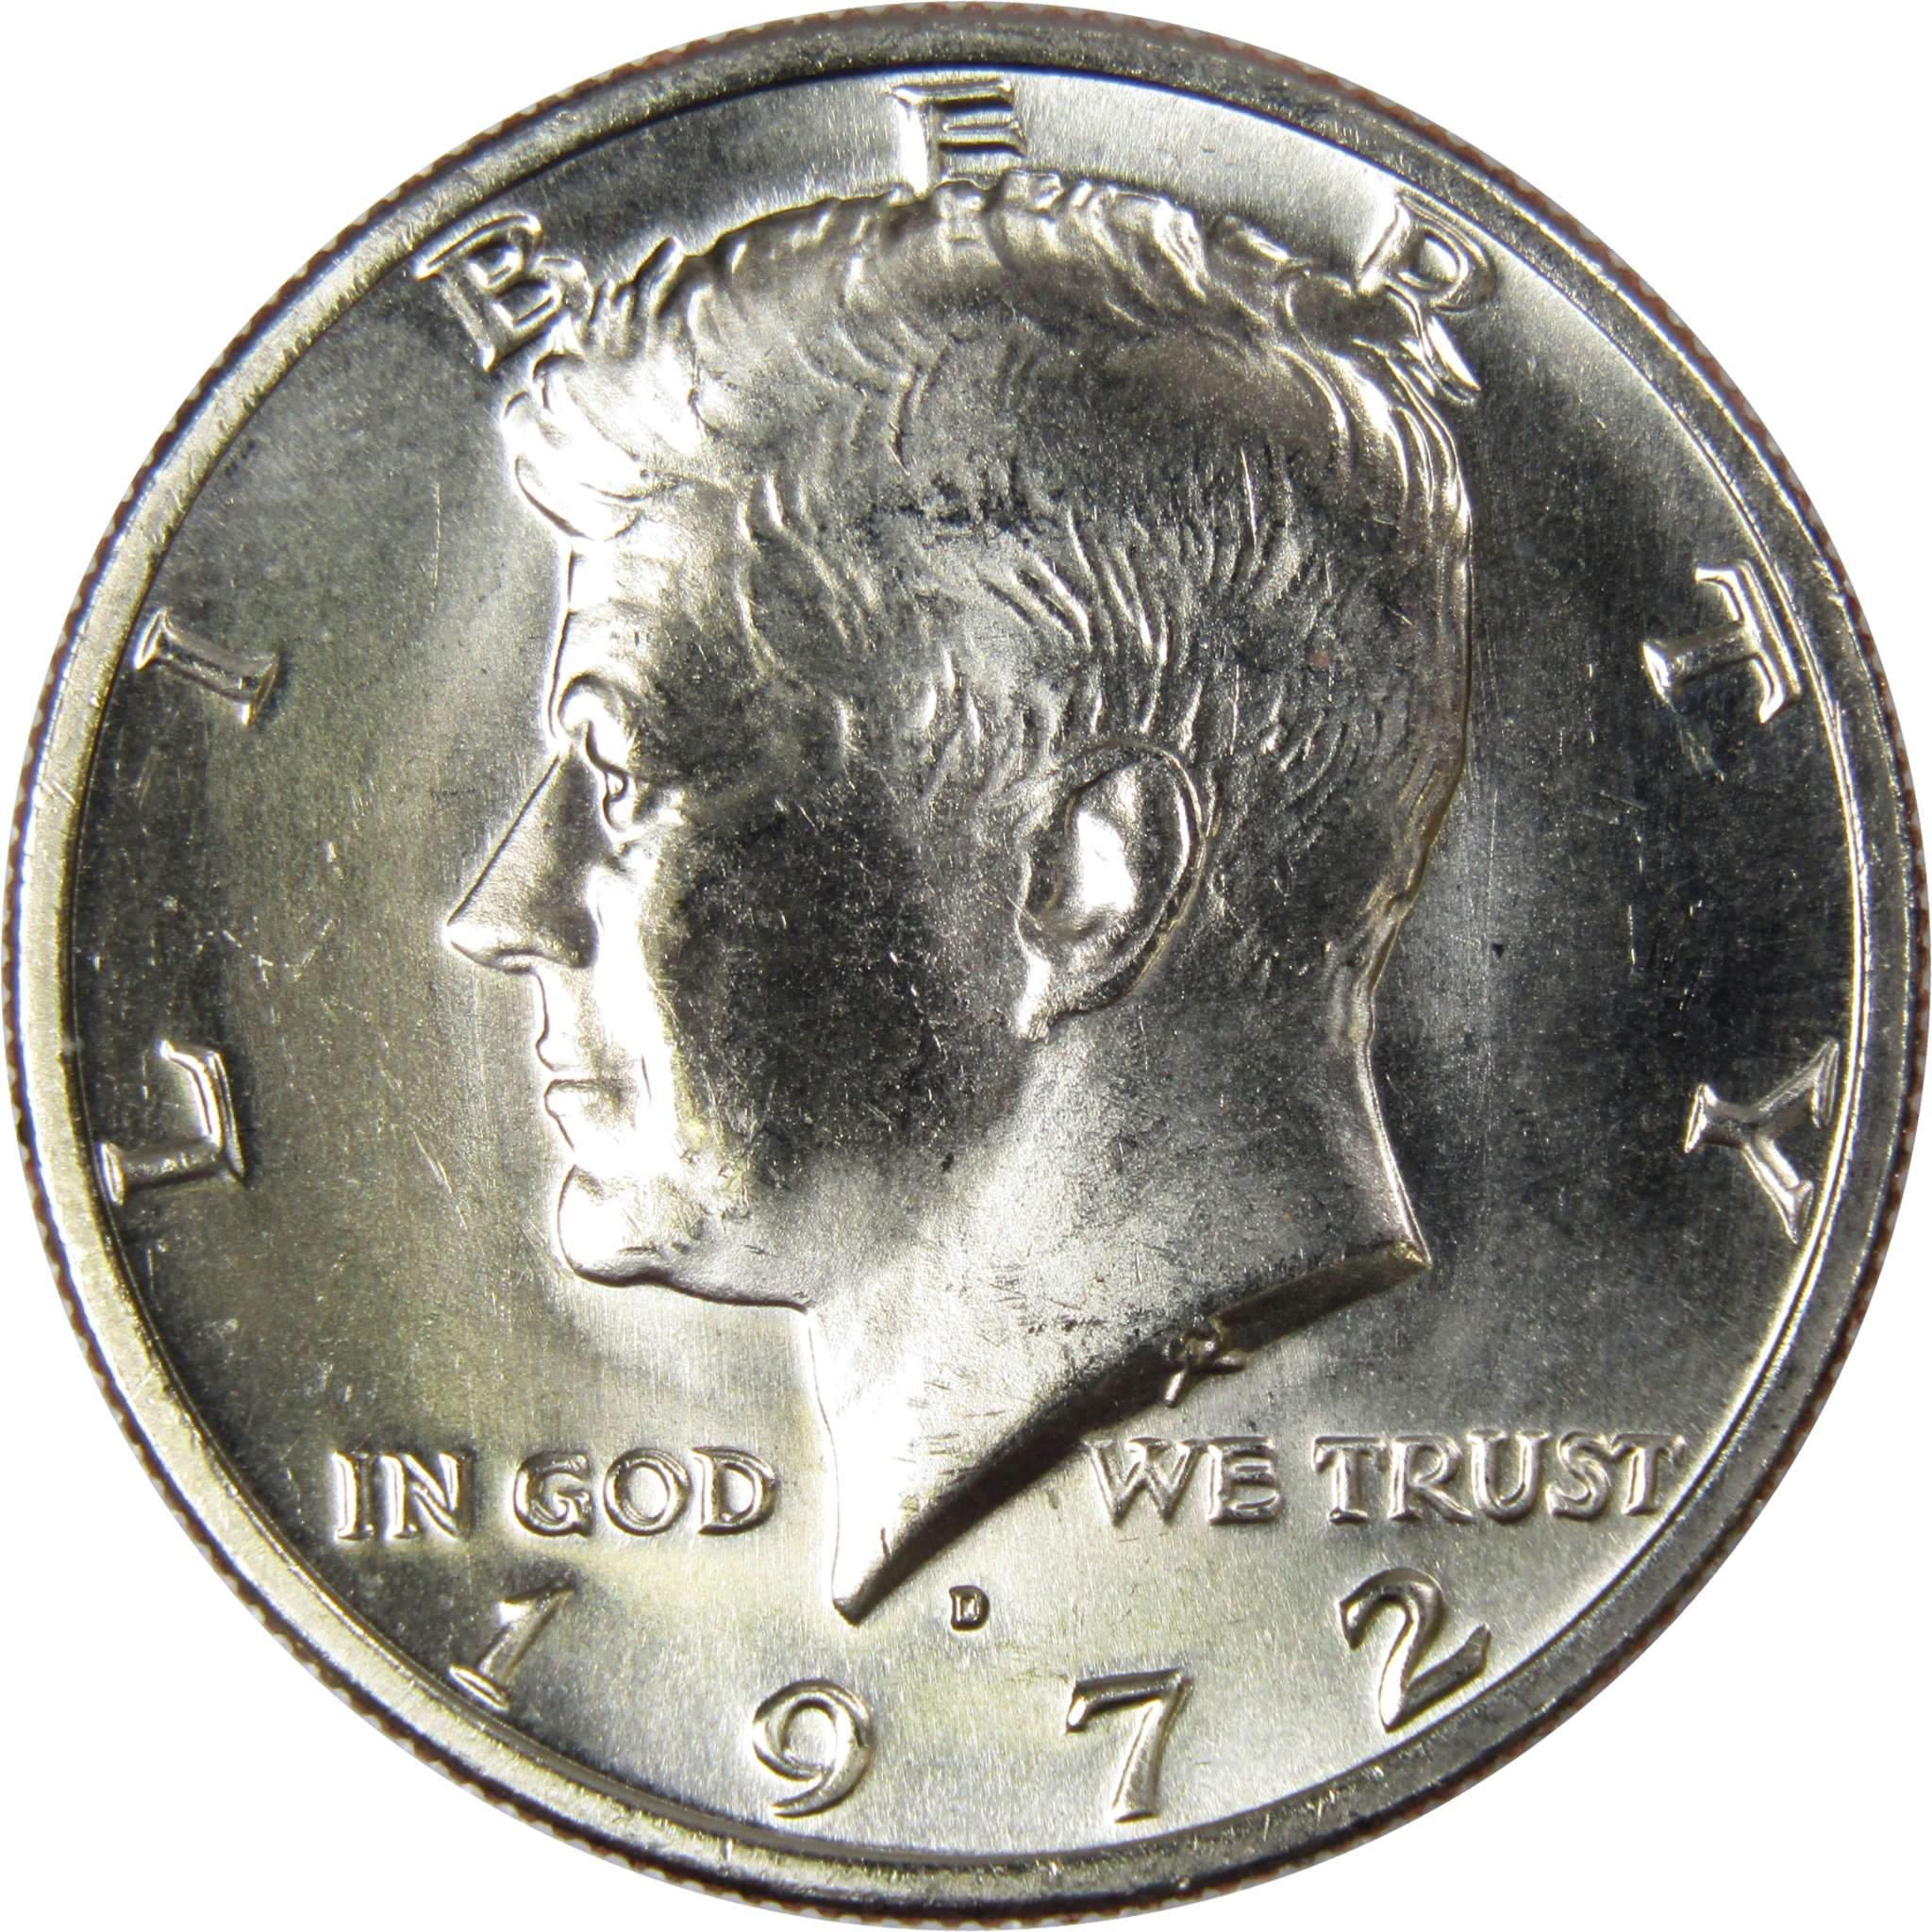 1972 D Kennedy Half Dollar BU Uncirculated Mint State 50c US Coin Collectible